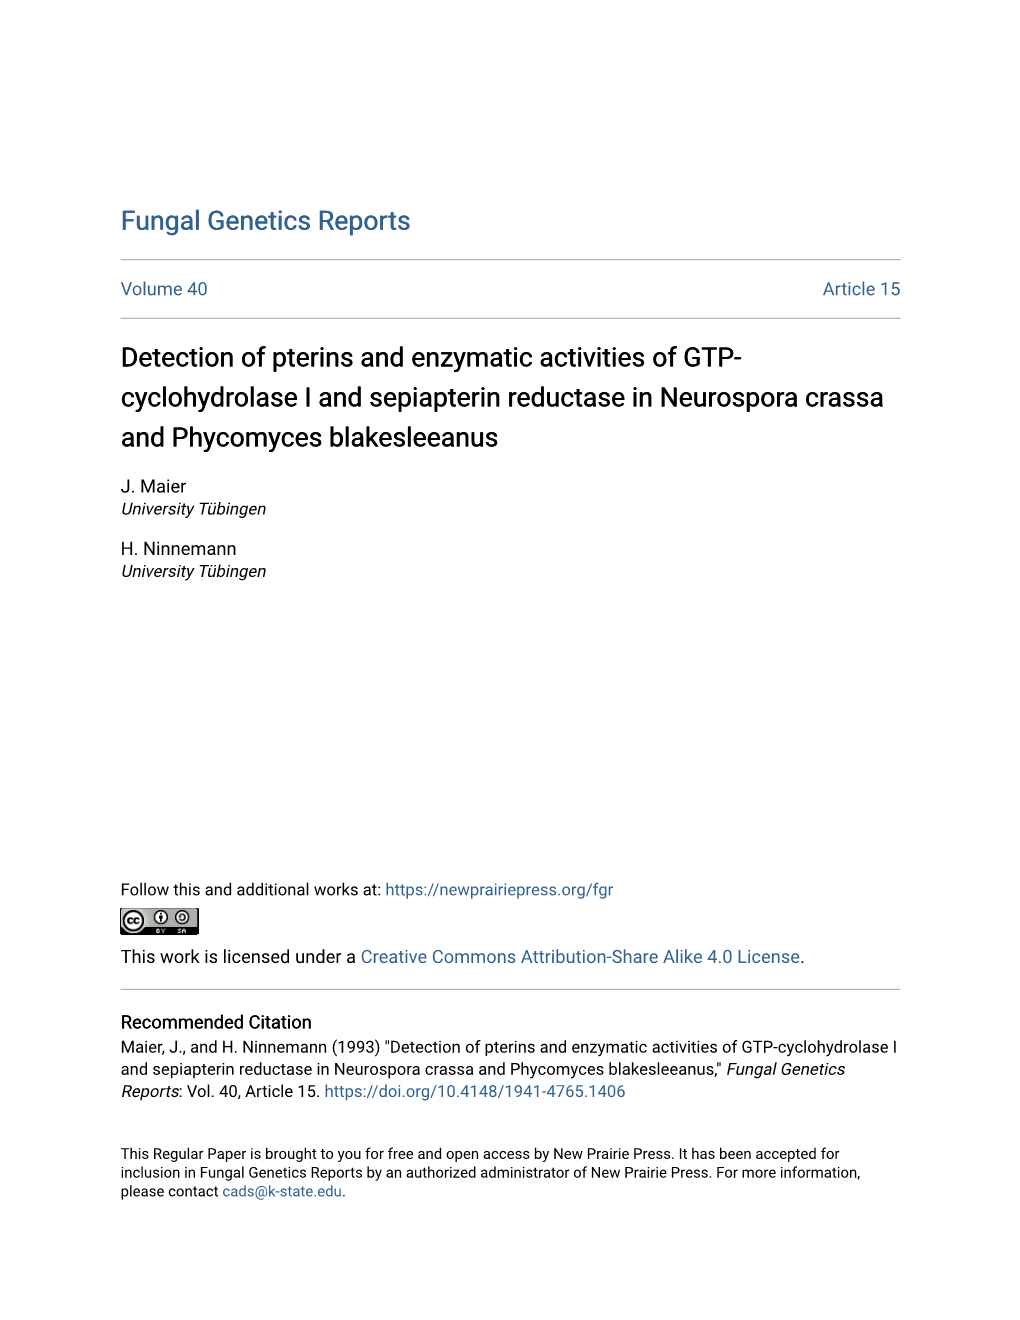 Detection of Pterins and Enzymatic Activities of GTP-Cyclohydrolase I